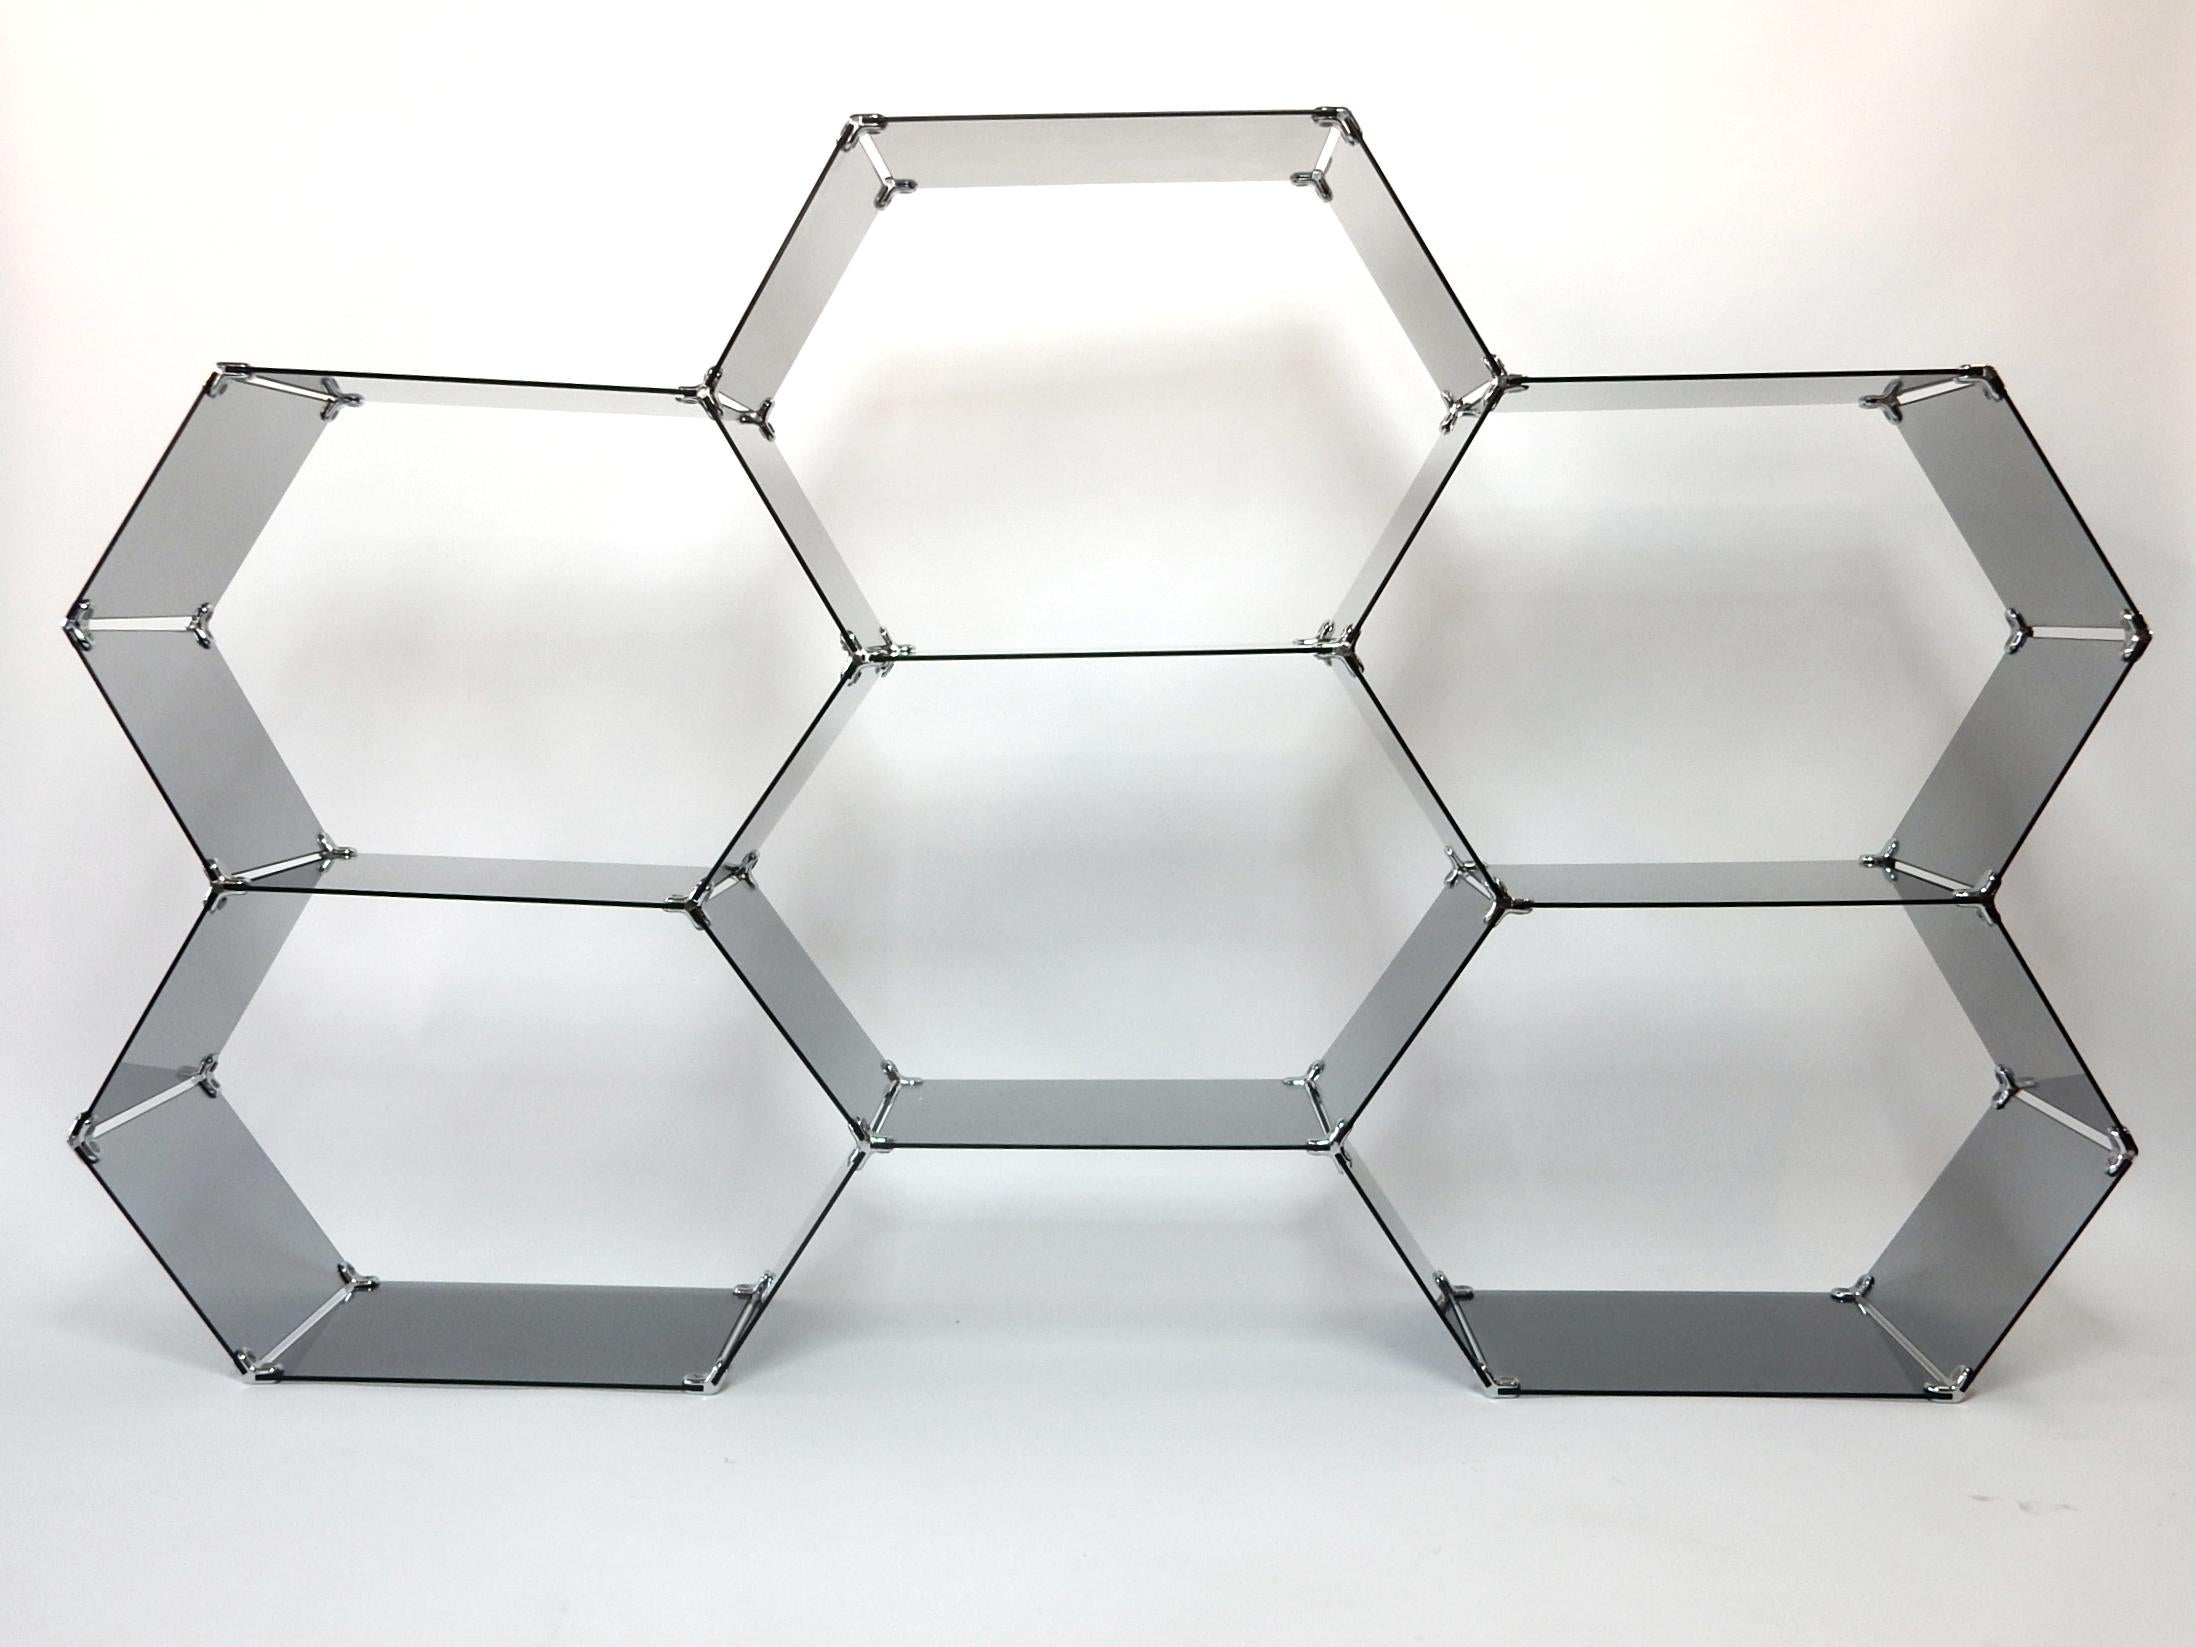 Hexagonal honeycomb display étagère.
Interconnected smoke glass plates fastened via chromed metal clips creating 6 hexagonal spaces to display your most cherished collection.
Measures: 6 feet wide x 45 inch tall. This can be assembled to go on top